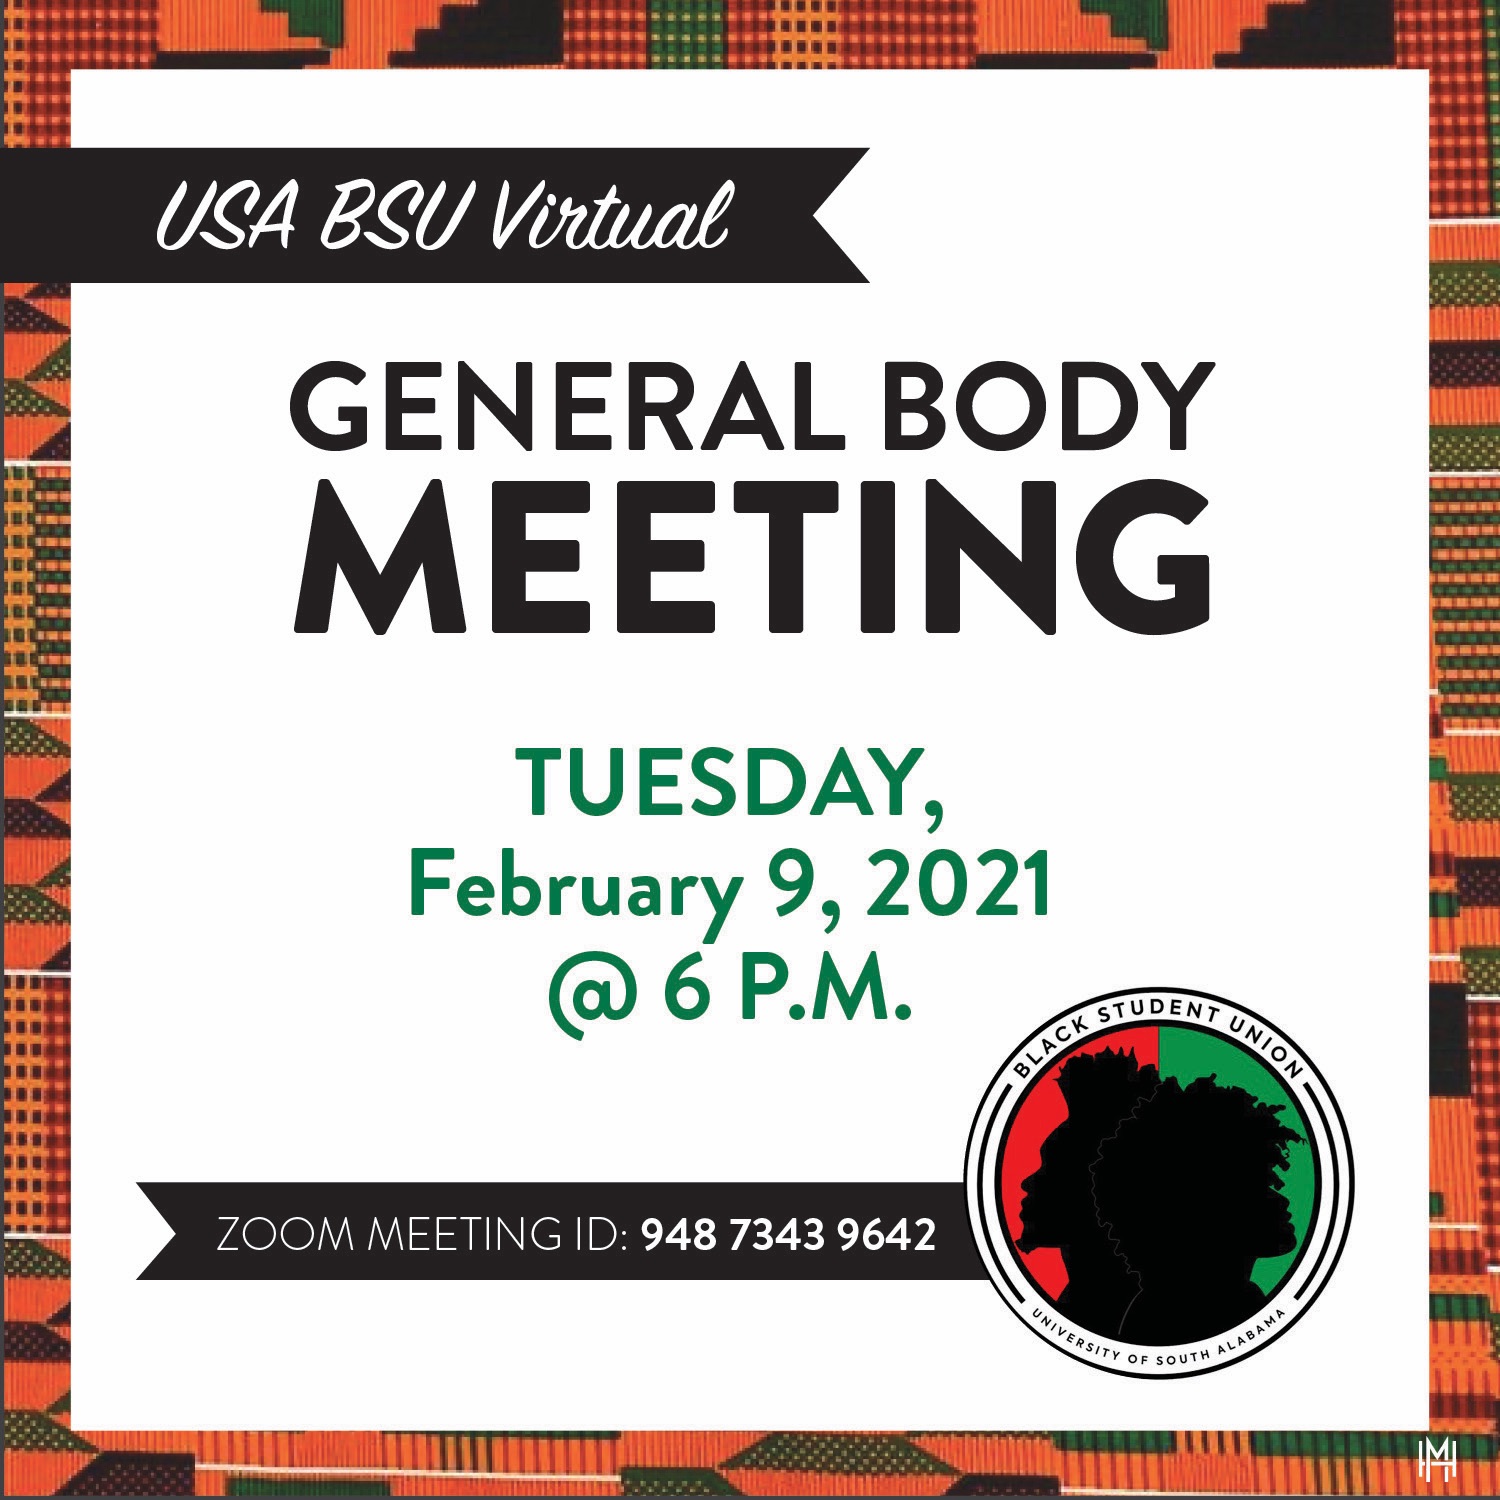 General Body Meeting Tuesday February 9, 2021 at 6 pm